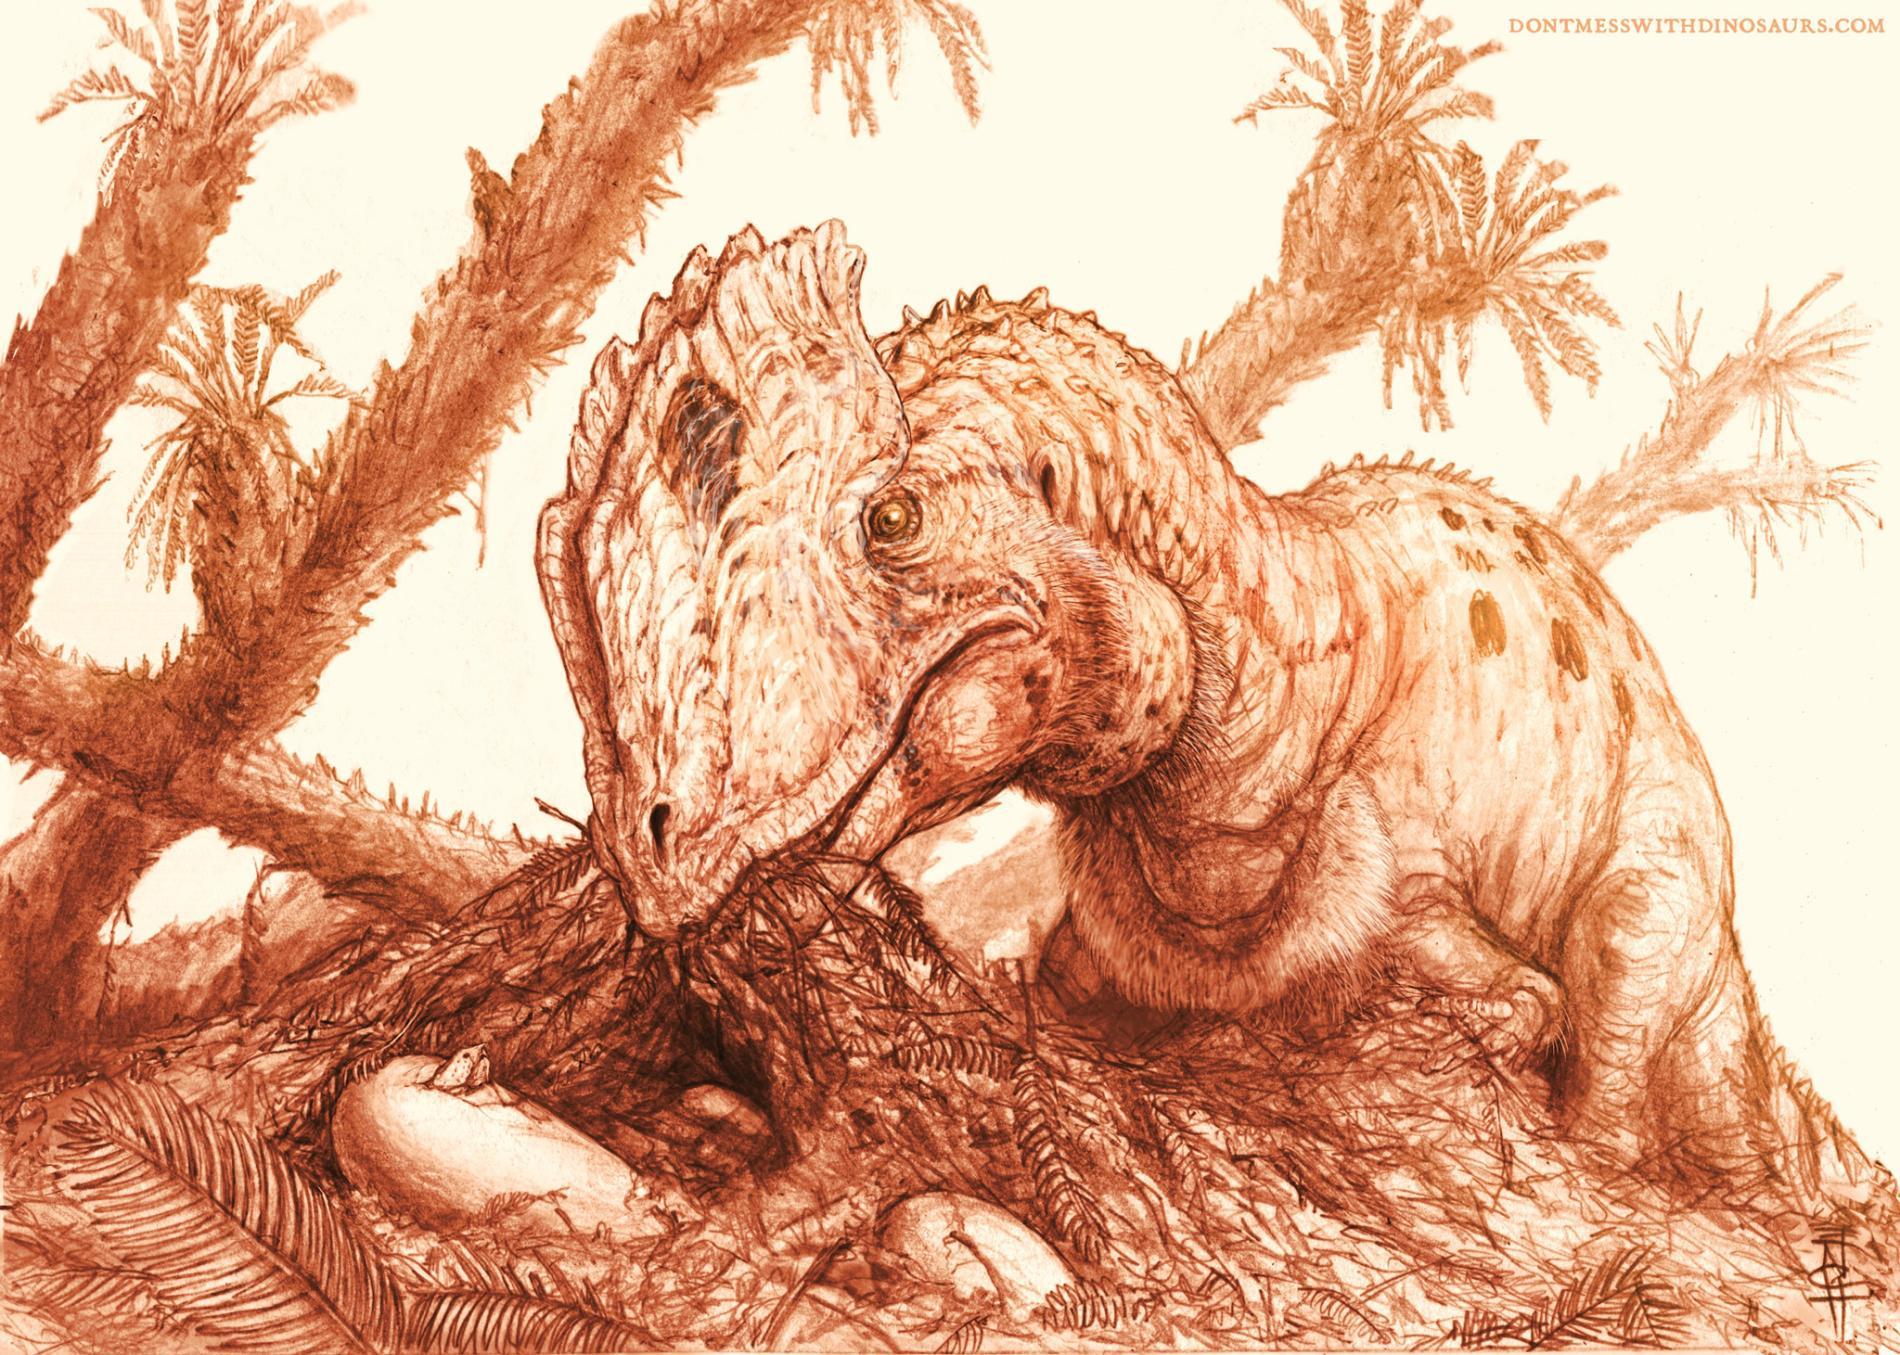 illustration in sepia tones of a dinosaur eating with prehistoric palm trees in the background